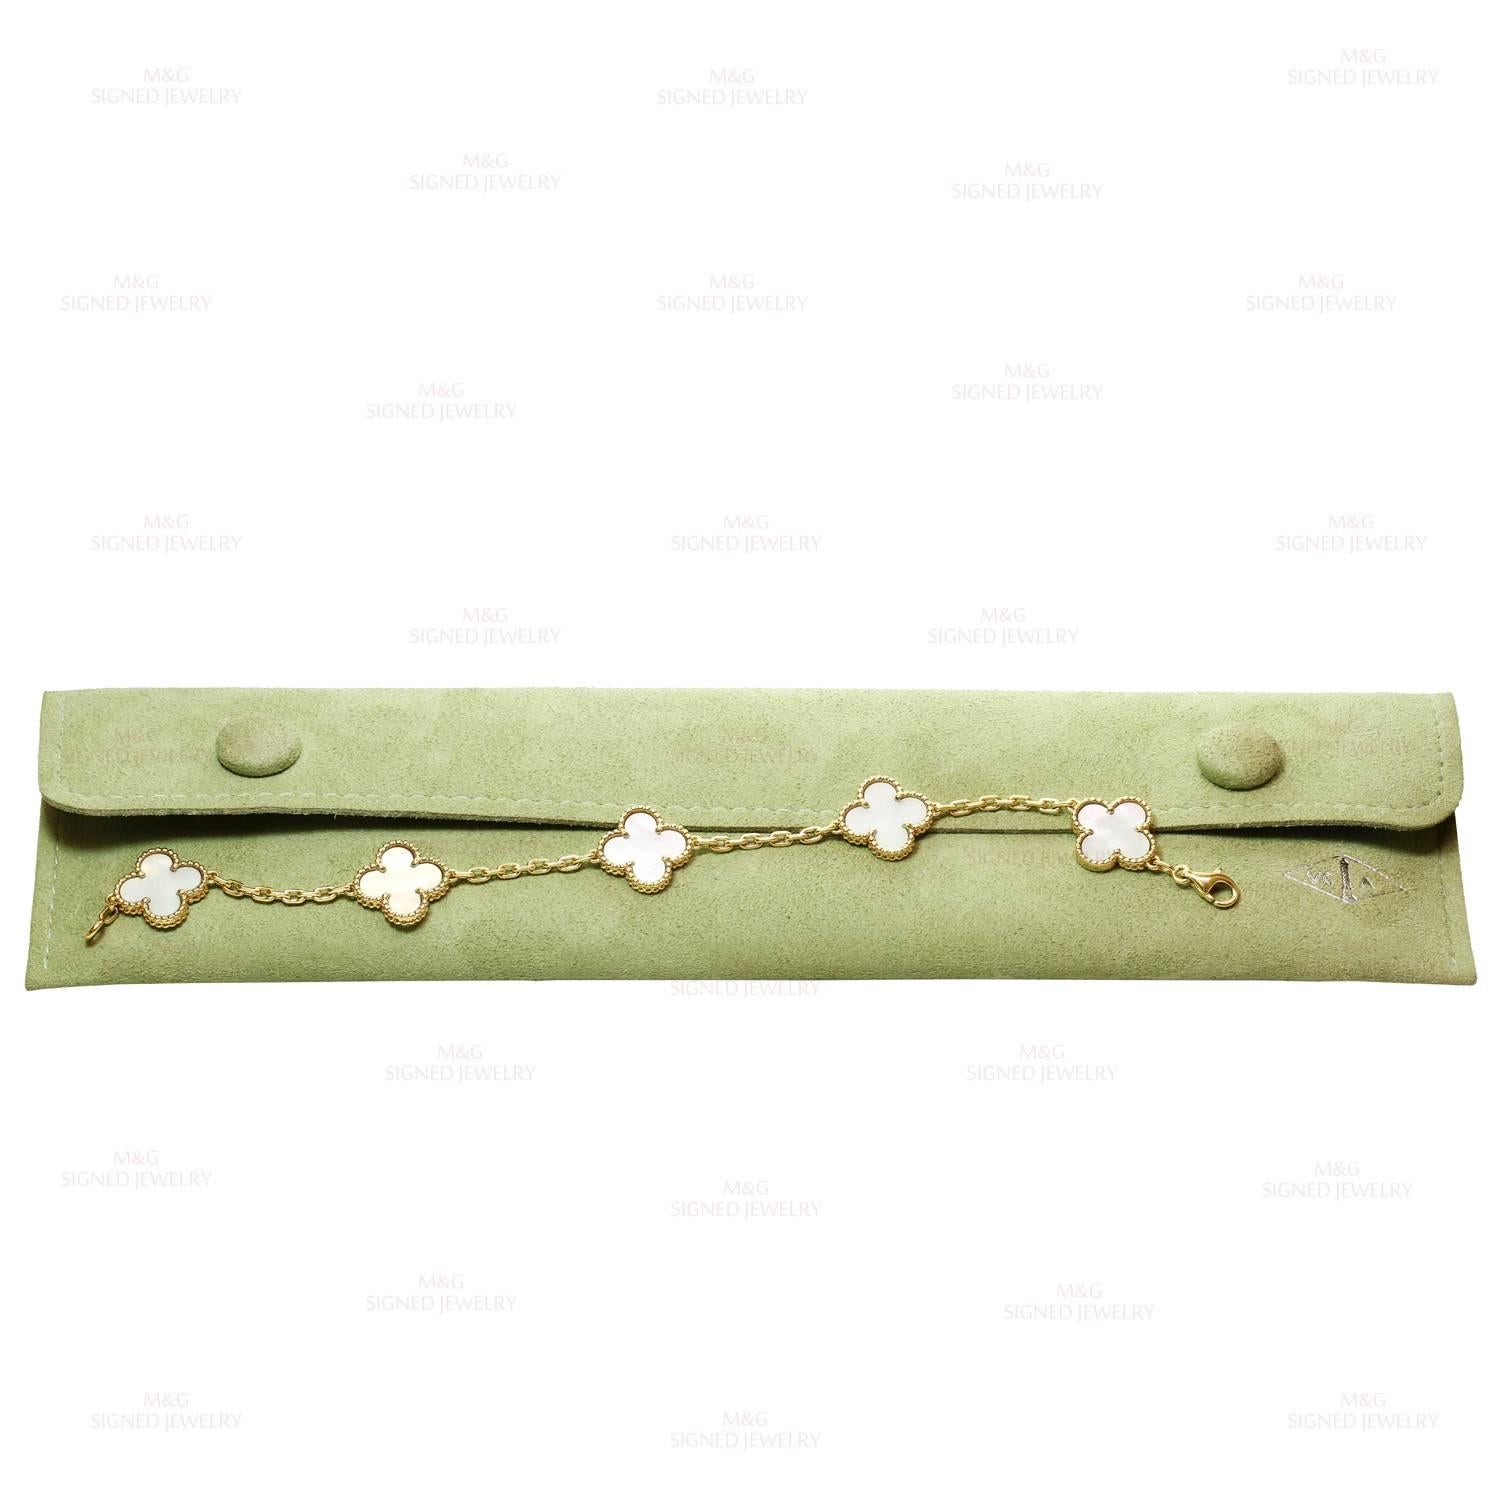 This classic bracelet from the iconic Alhambra collection by Van Cleef & Arpels is crafted in 18k yellow gold and features 5 lucky clover motifs set with mother-of-pearl. Made in France circa 2014. Measurements: 0.27